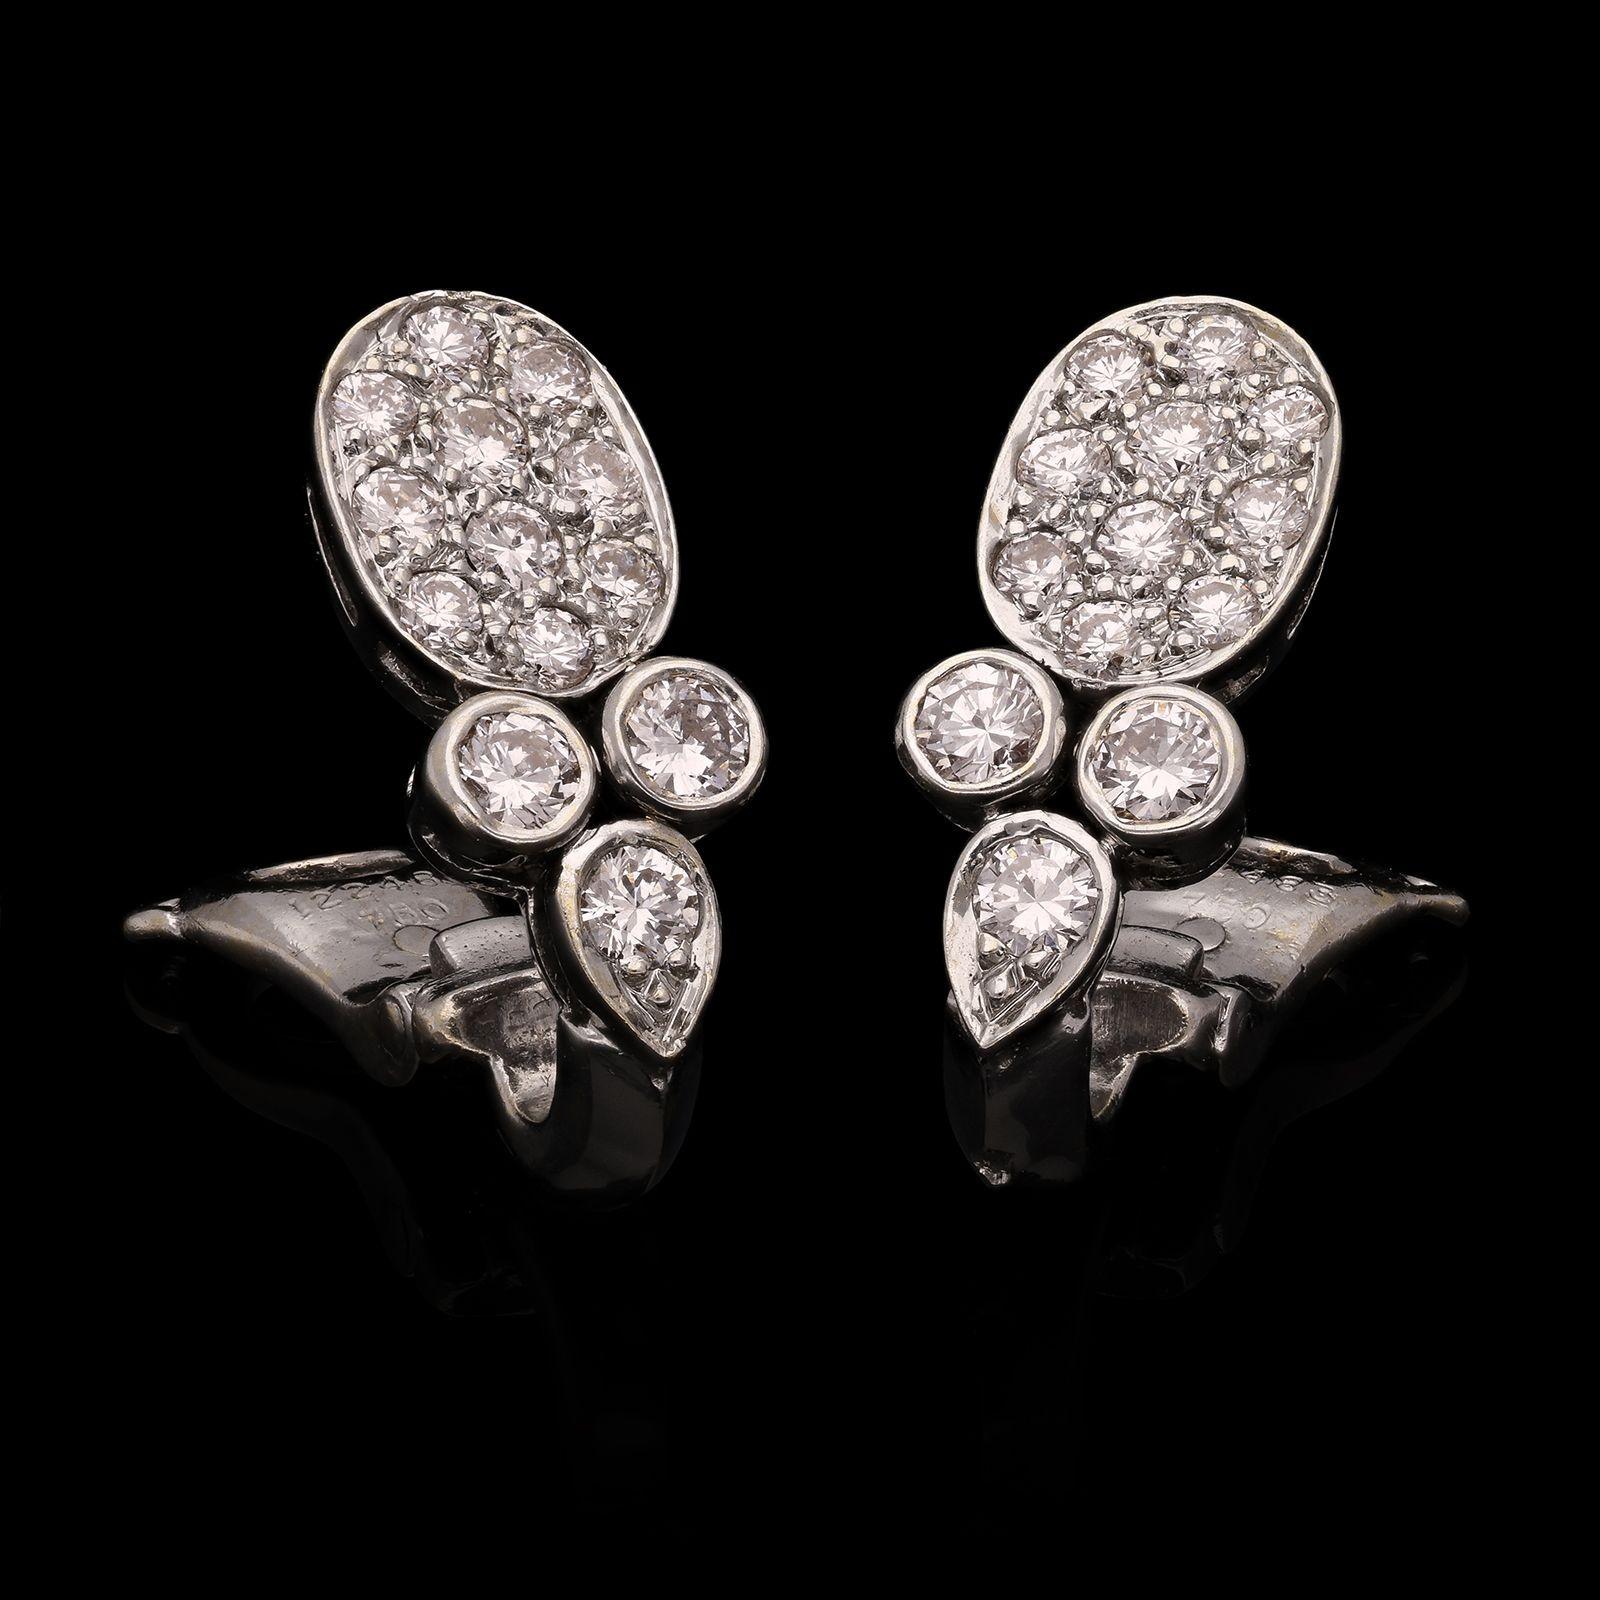 A chic pair of diamond and white gold ear clips by Cartier, each designed as a flat oval motif pavé set with round brilliant cut diamonds above three further round brilliant diamonds, two in bezel settings and one in a pear shape setting, all in